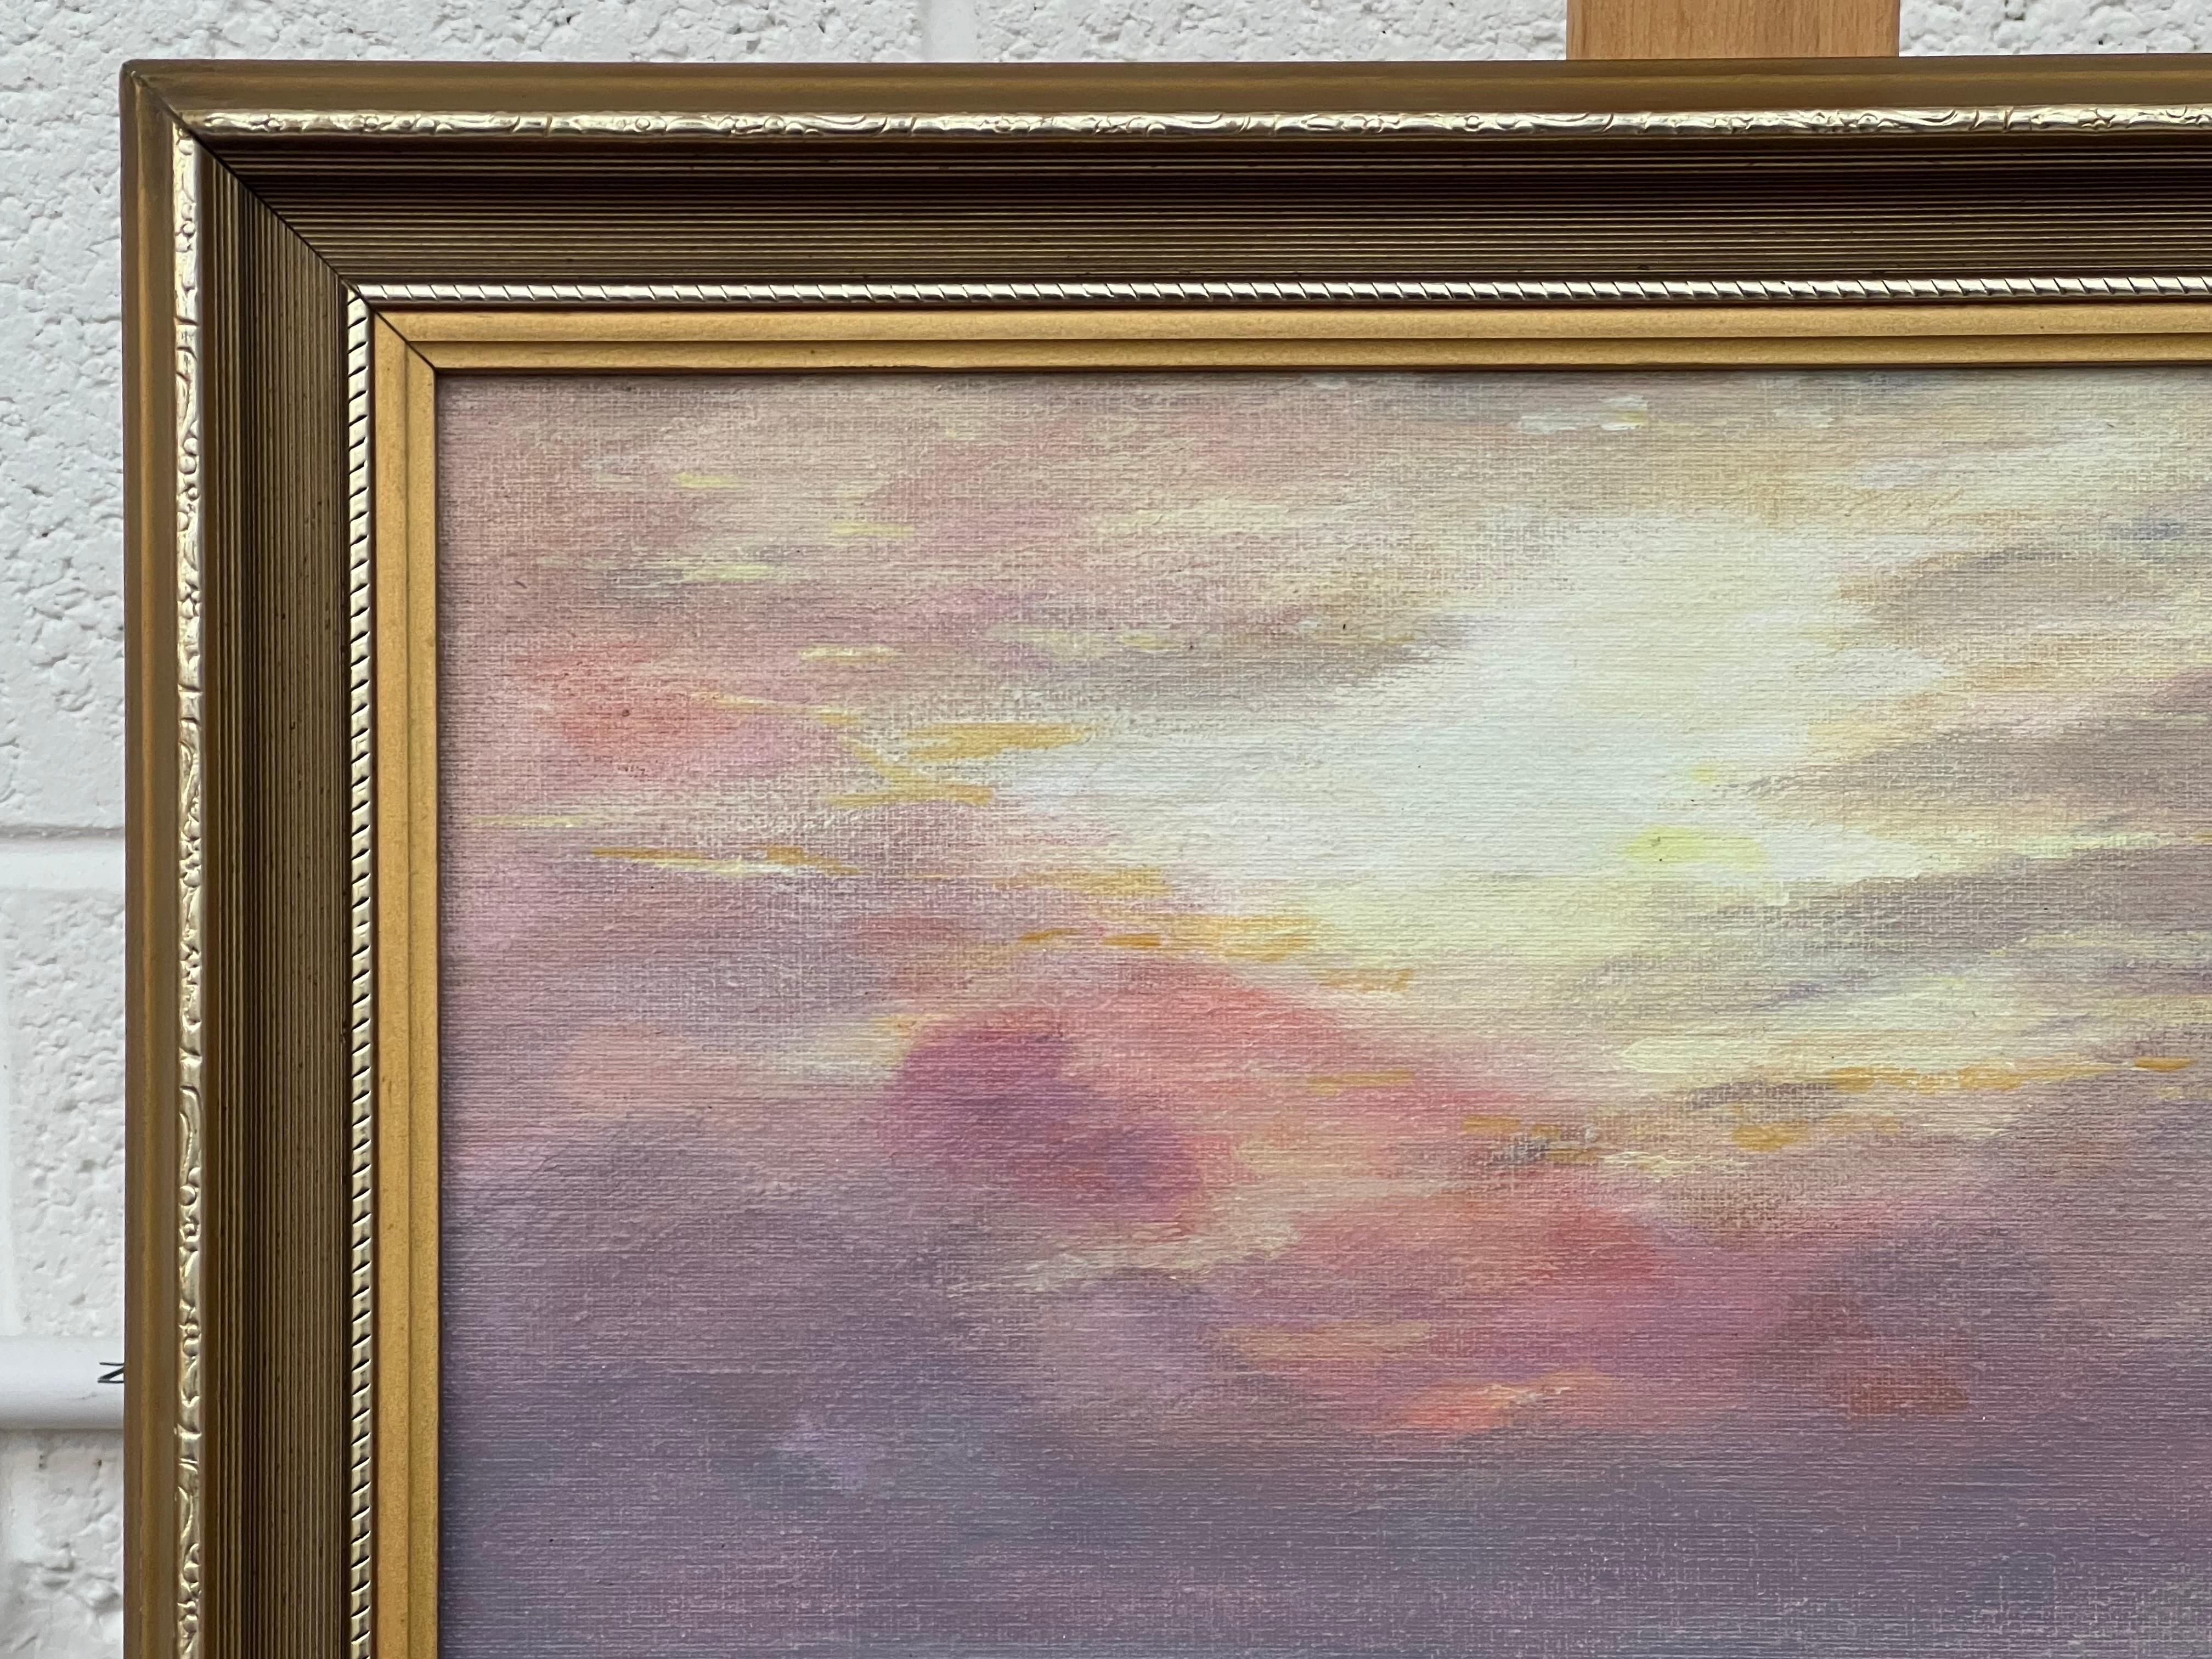 Dawn Seascape Painting with Pink Sky and Waves by 20th Century British Artist For Sale 1